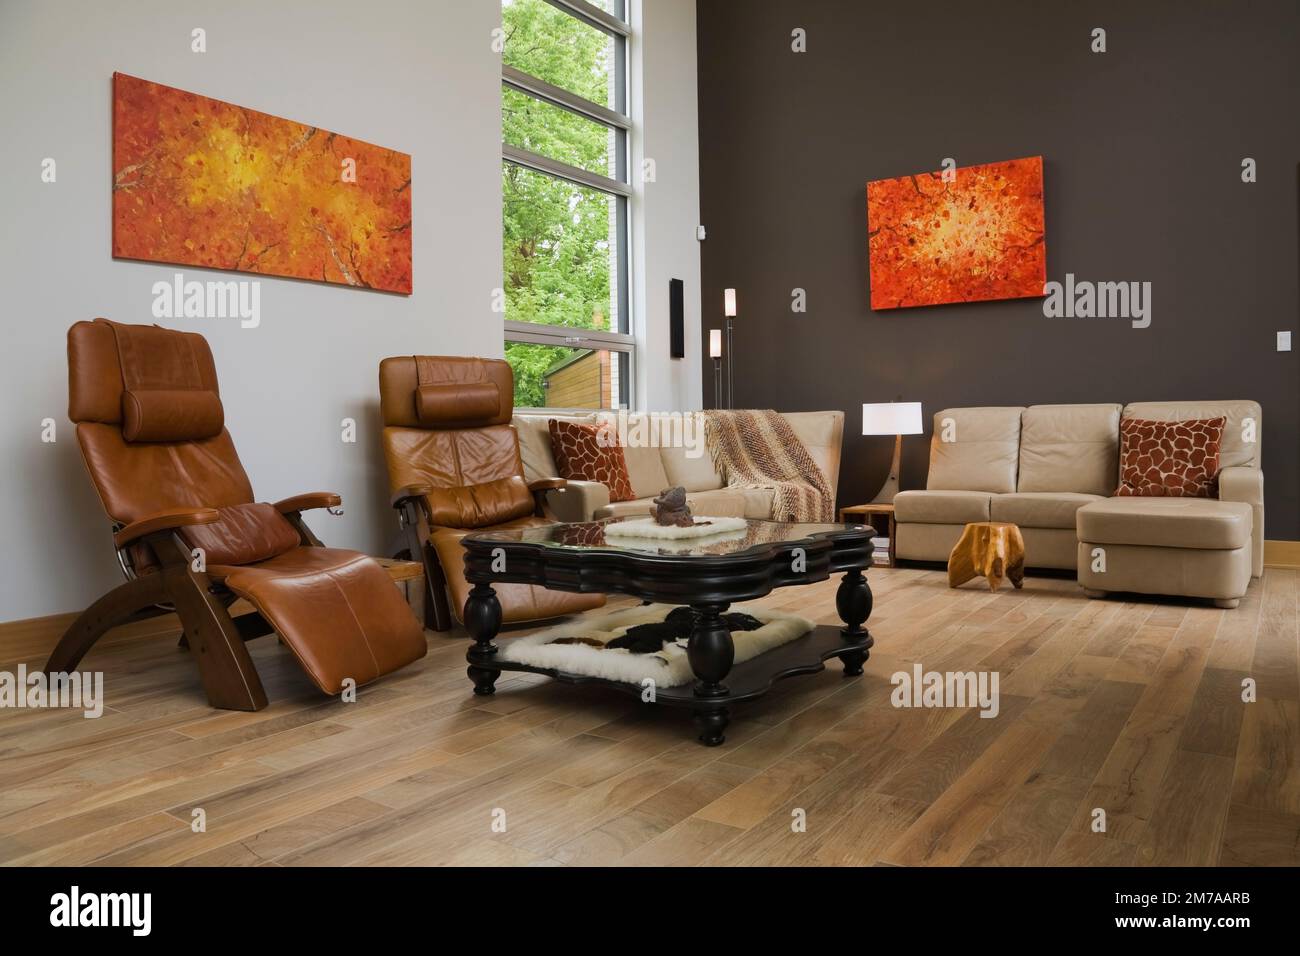 Caramel leather high back reclining armchairs and tan sofas with black wooden glass top coffee table in living room inside modern cubist style home. Stock Photo